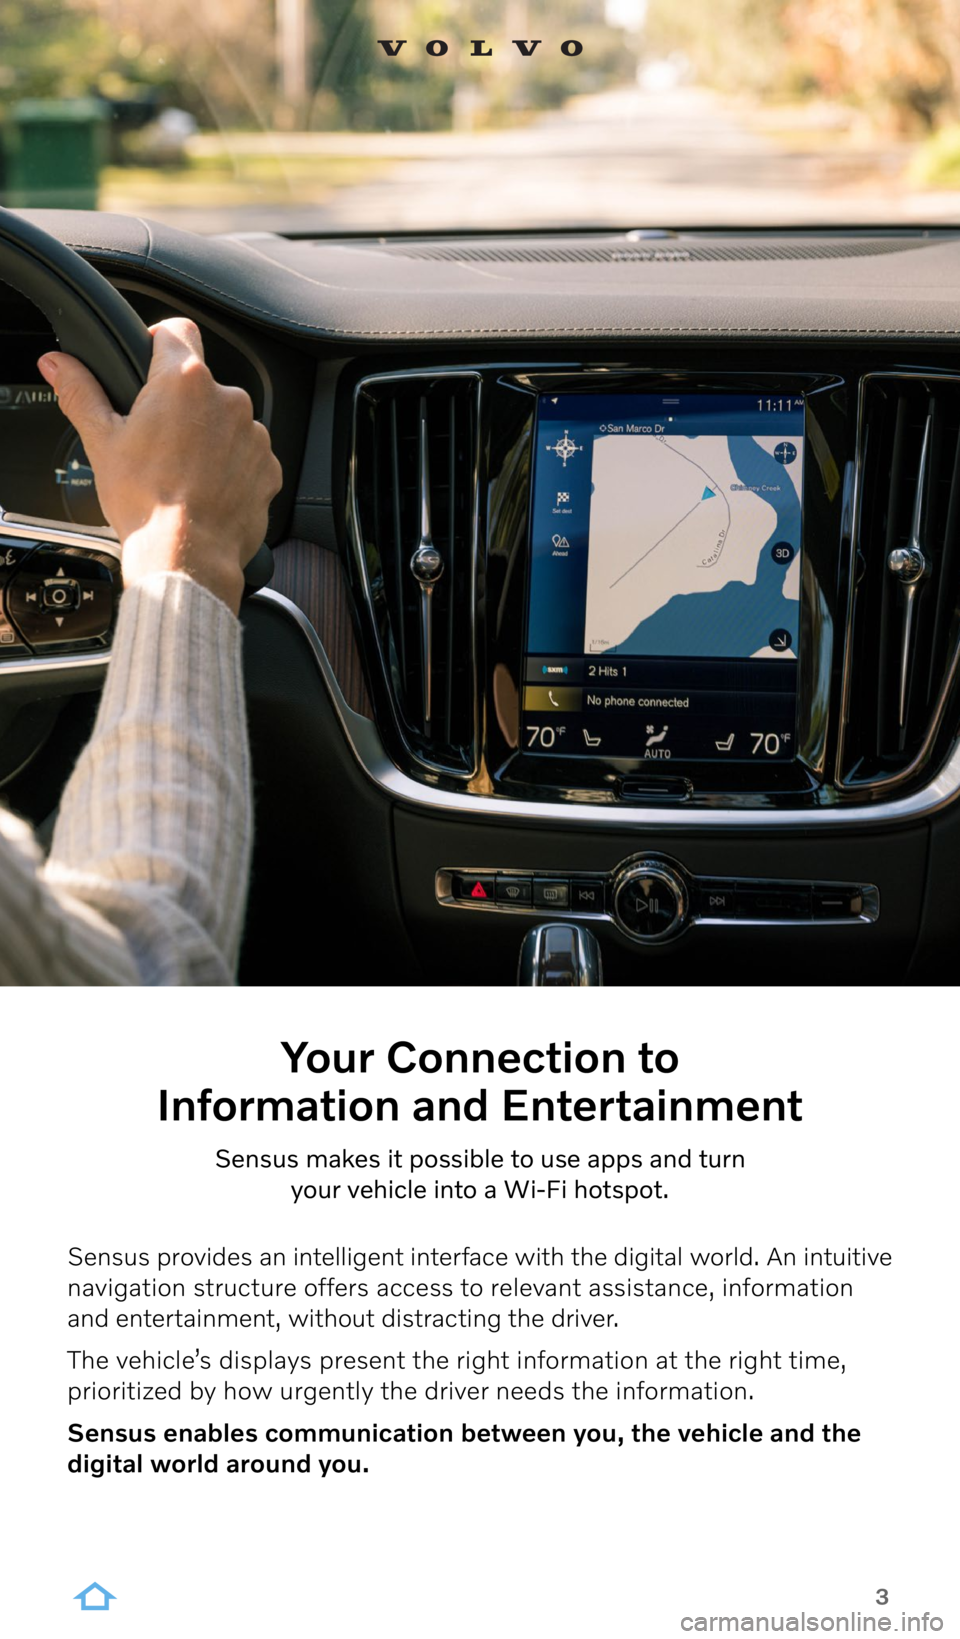 VOLVO XC40 2022  Sensus Digital Guide 3
Your Connection to  
Information and Entertainment
Sensus makes it possible to use apps and turn  
your vehicle into a Wi-Fi hotspot.
Sensus provides an intelligent interface with the digital world.